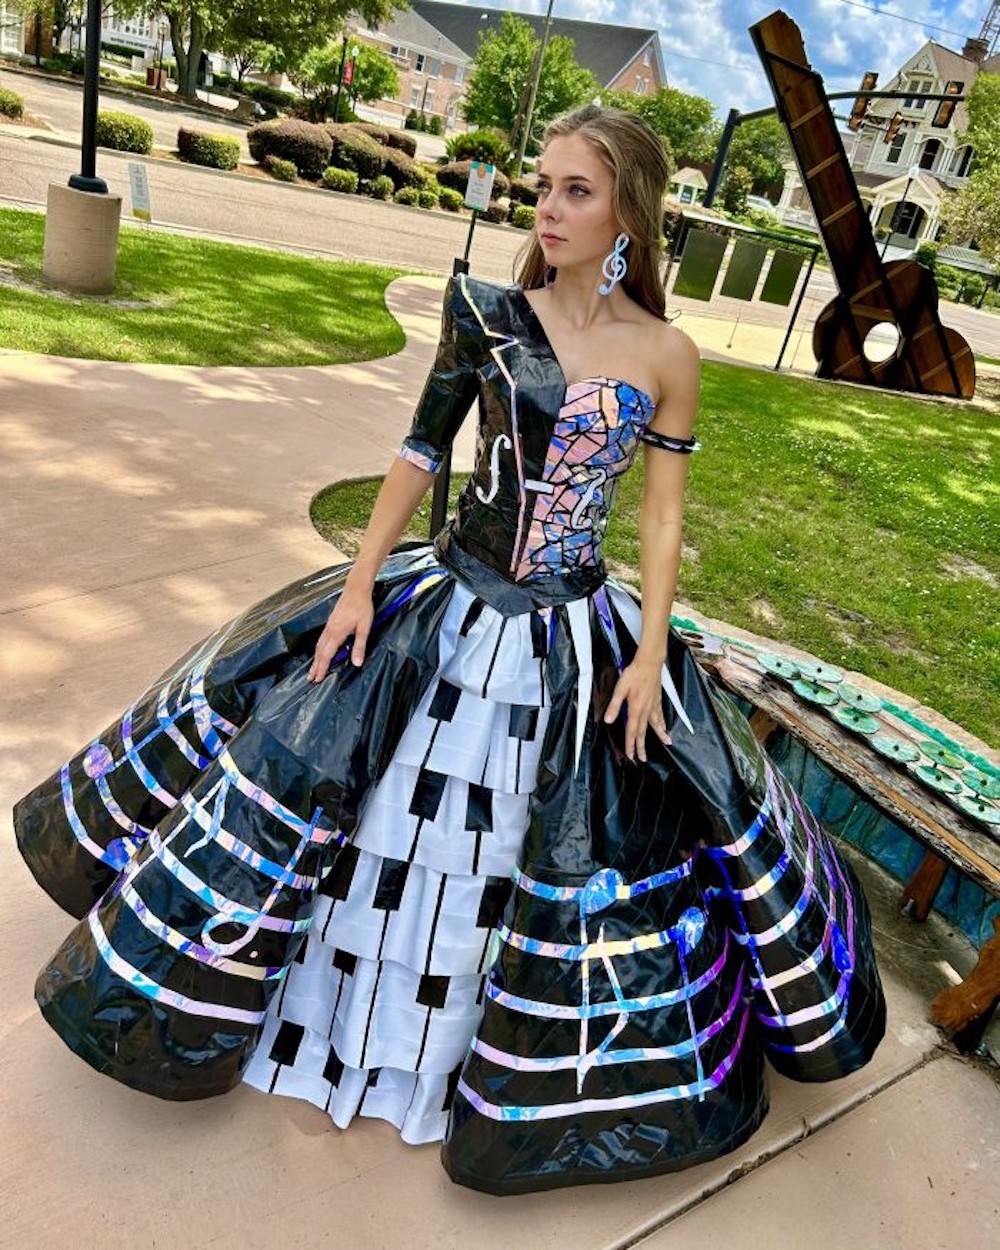 musically inspired gown of duct tape by Aubri S